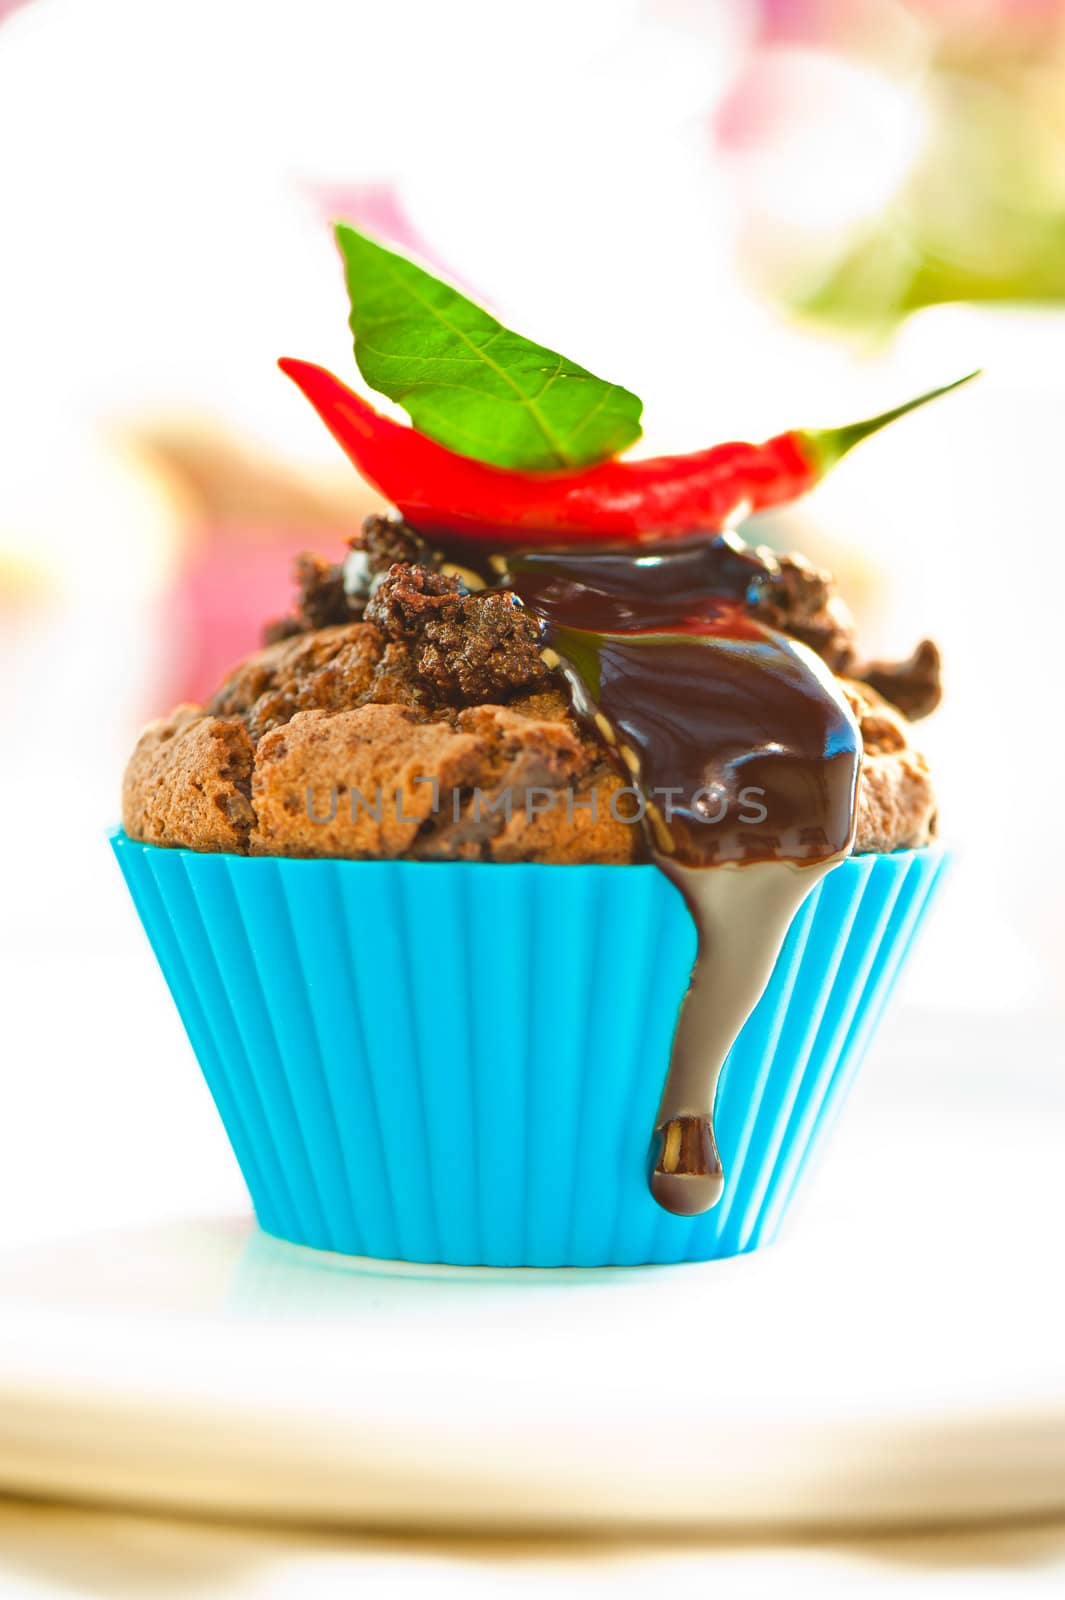 Hot chocolate cupcake with liquid chocolate and a red chili as a outdoor shooting